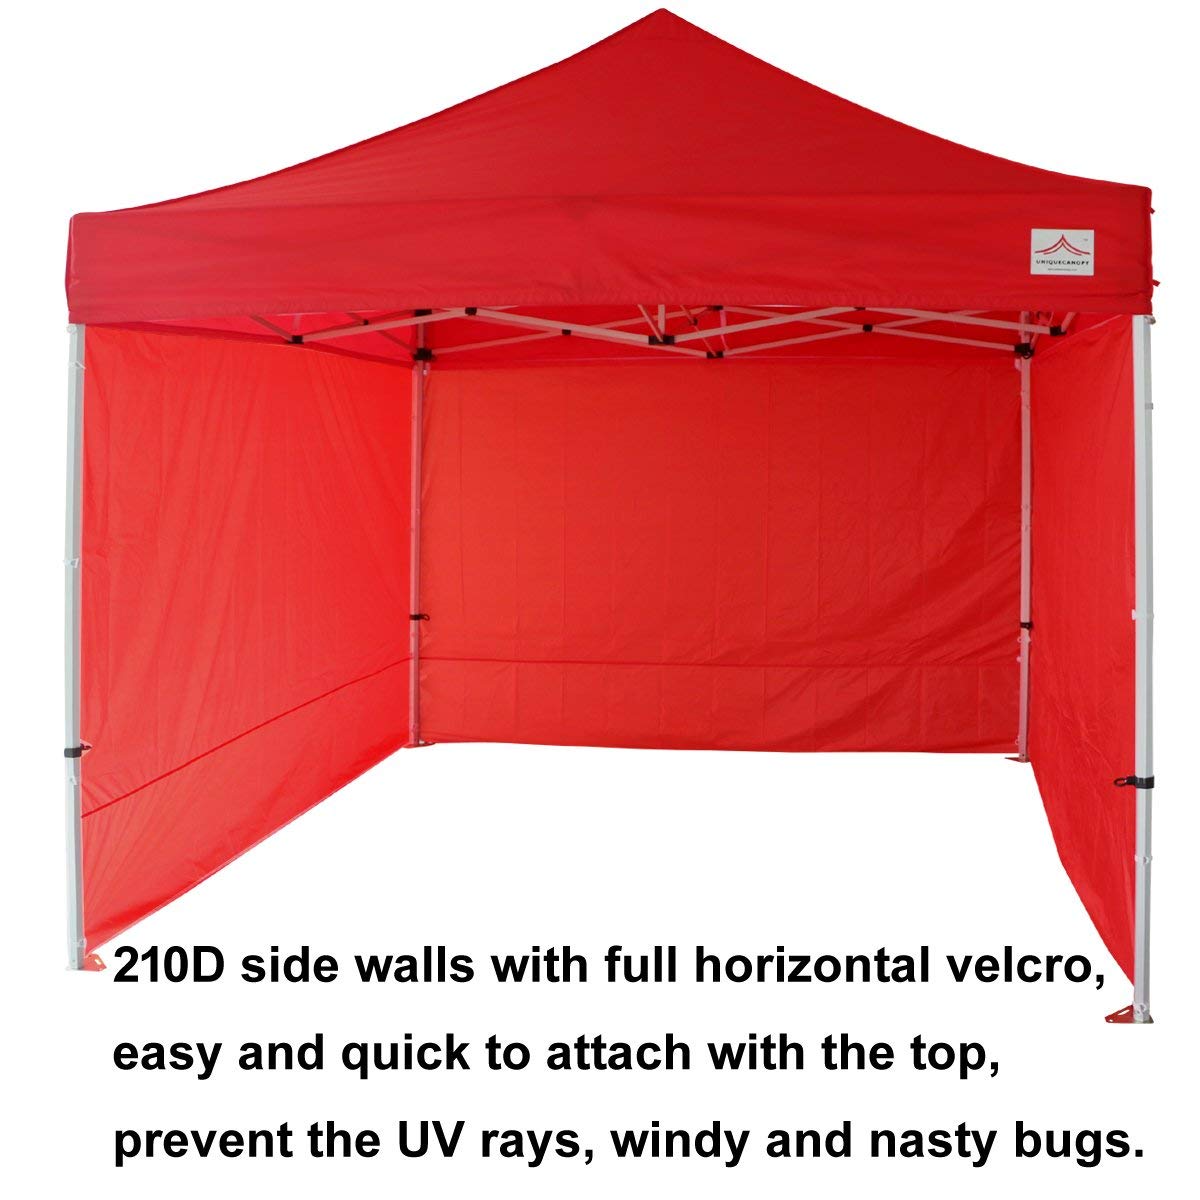 sidewalls of 10x10 pop up canpy with side